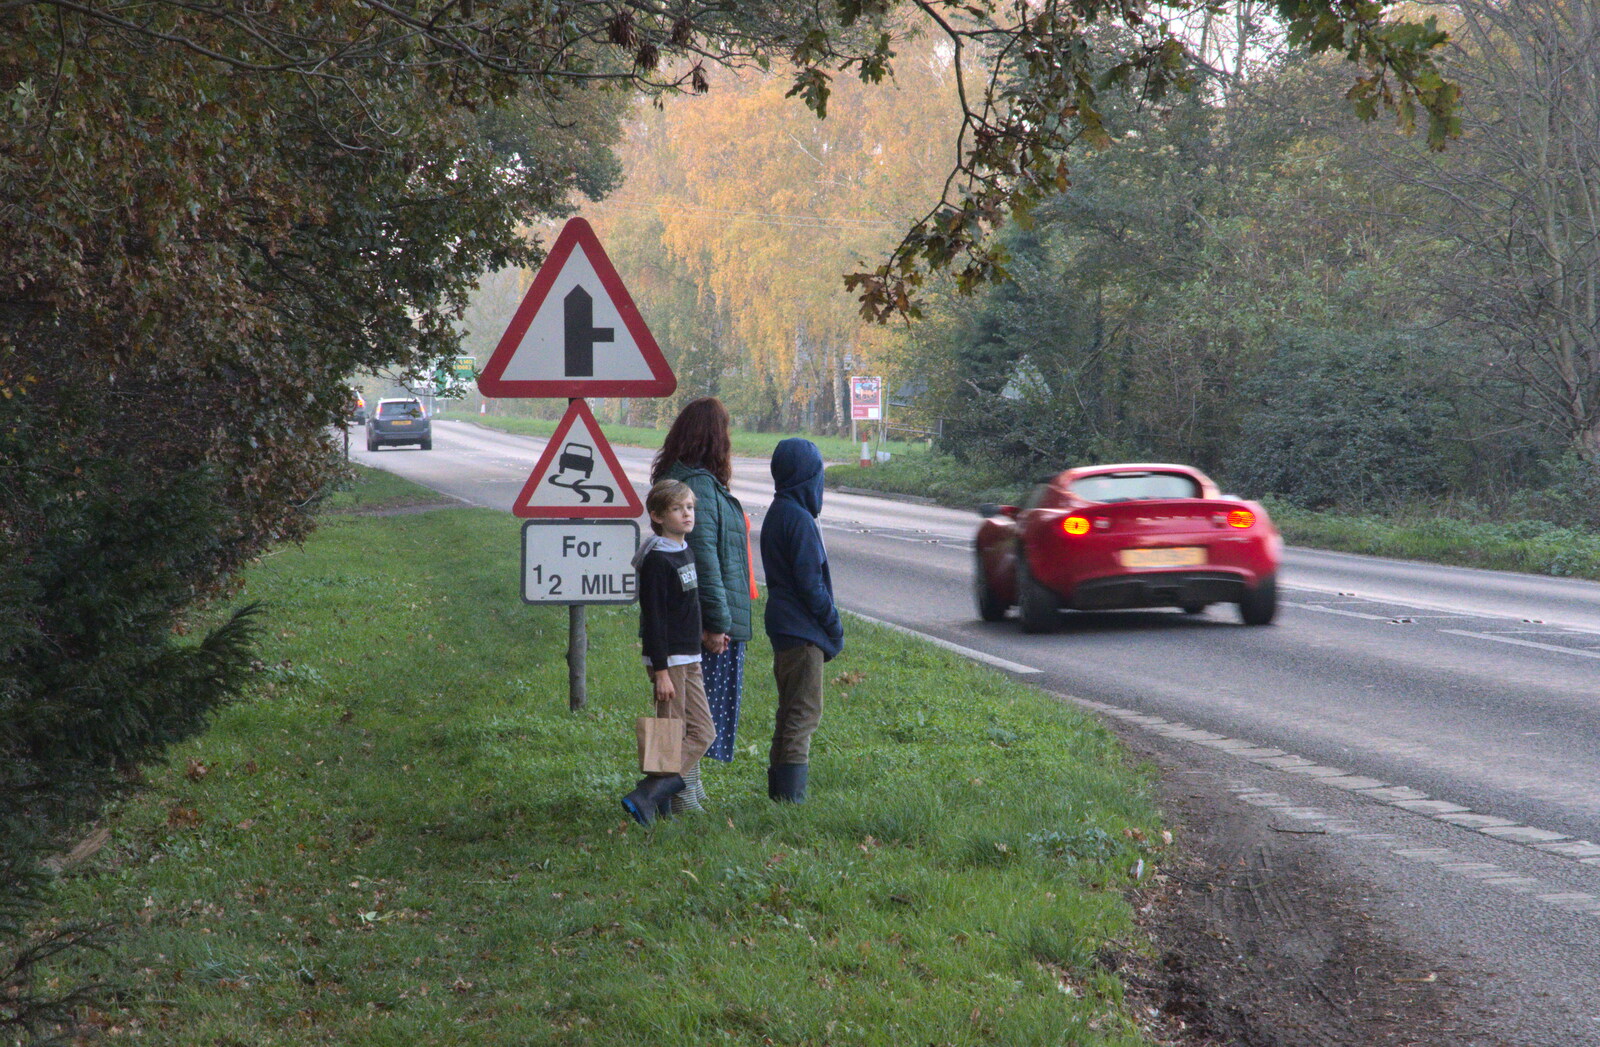 We wait for a safe gap to cross the A140 from To See the Hairy Pigs, Thrandeston, Suffolk - 7th November 2020